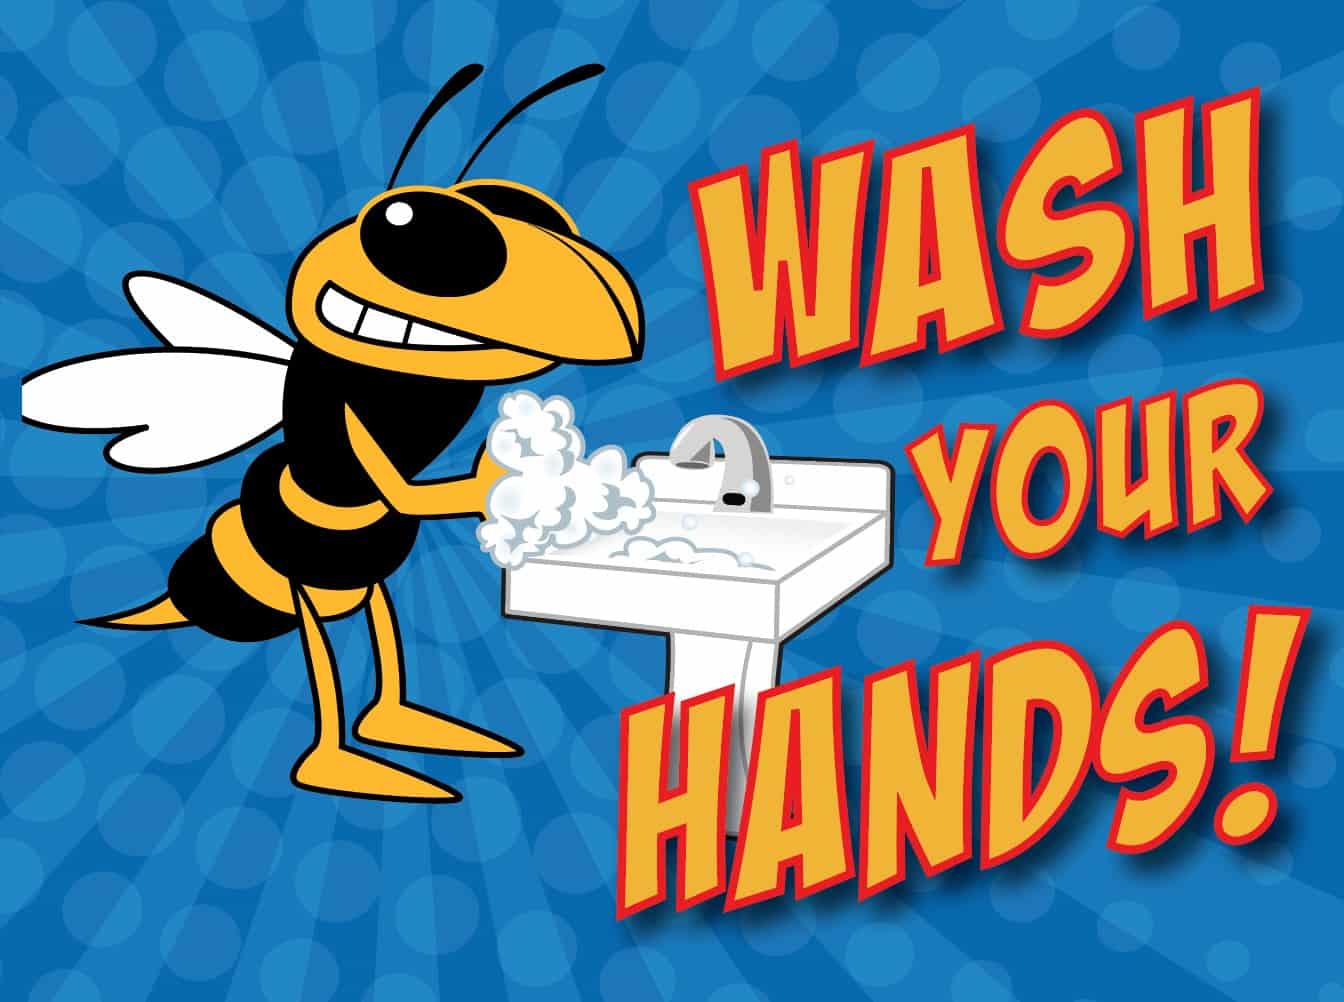 Wash Hands Poster Yellow Jacket